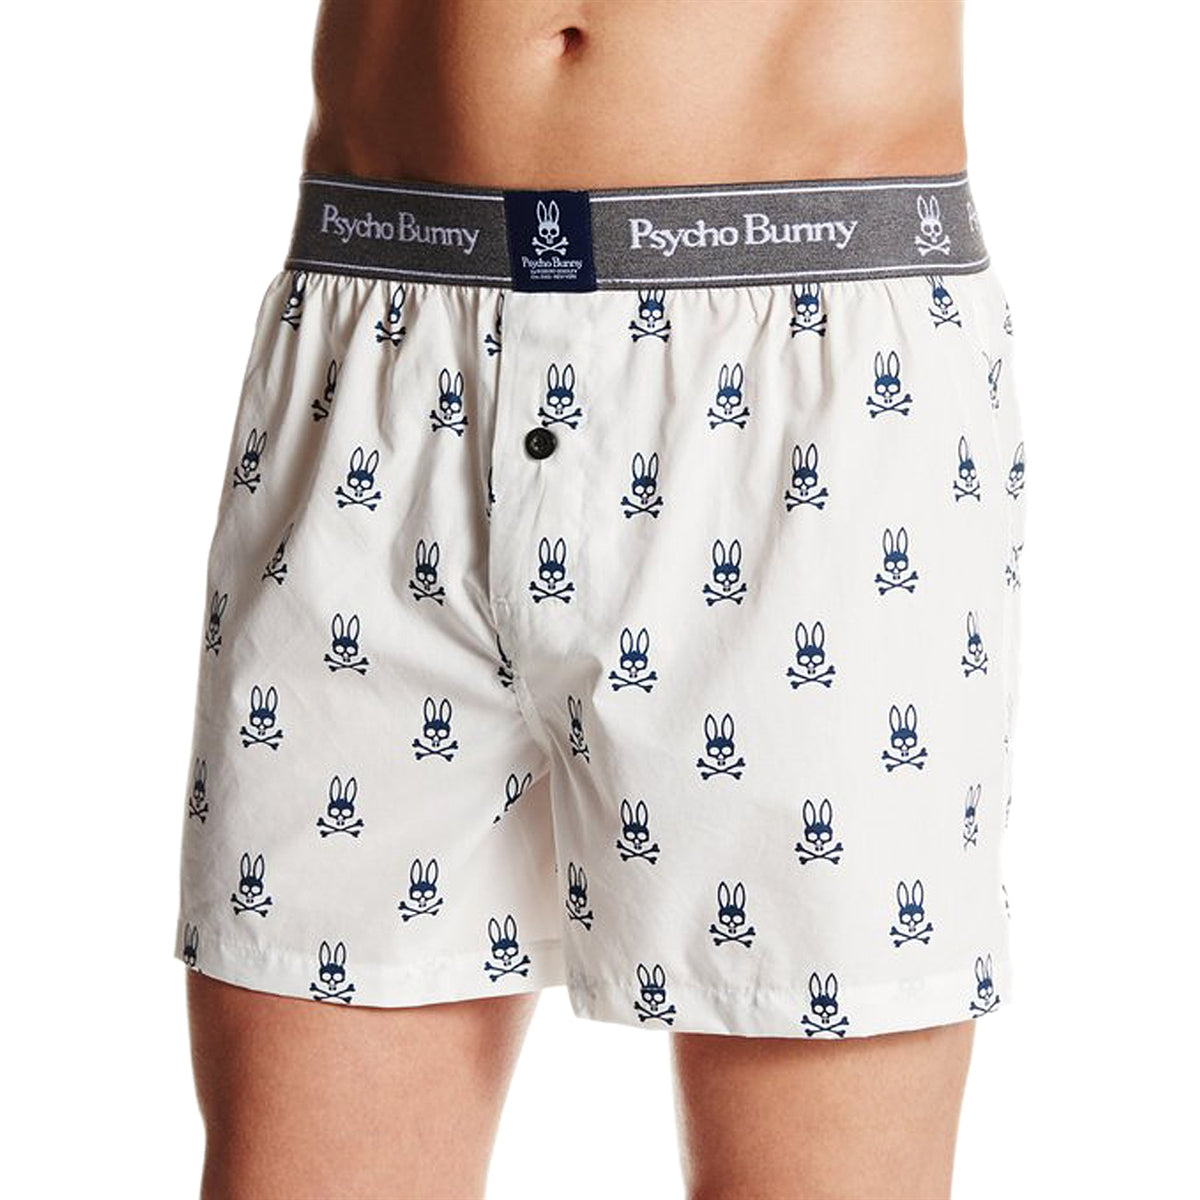 Psycho Bunny - Woven Boxer Shorts in White